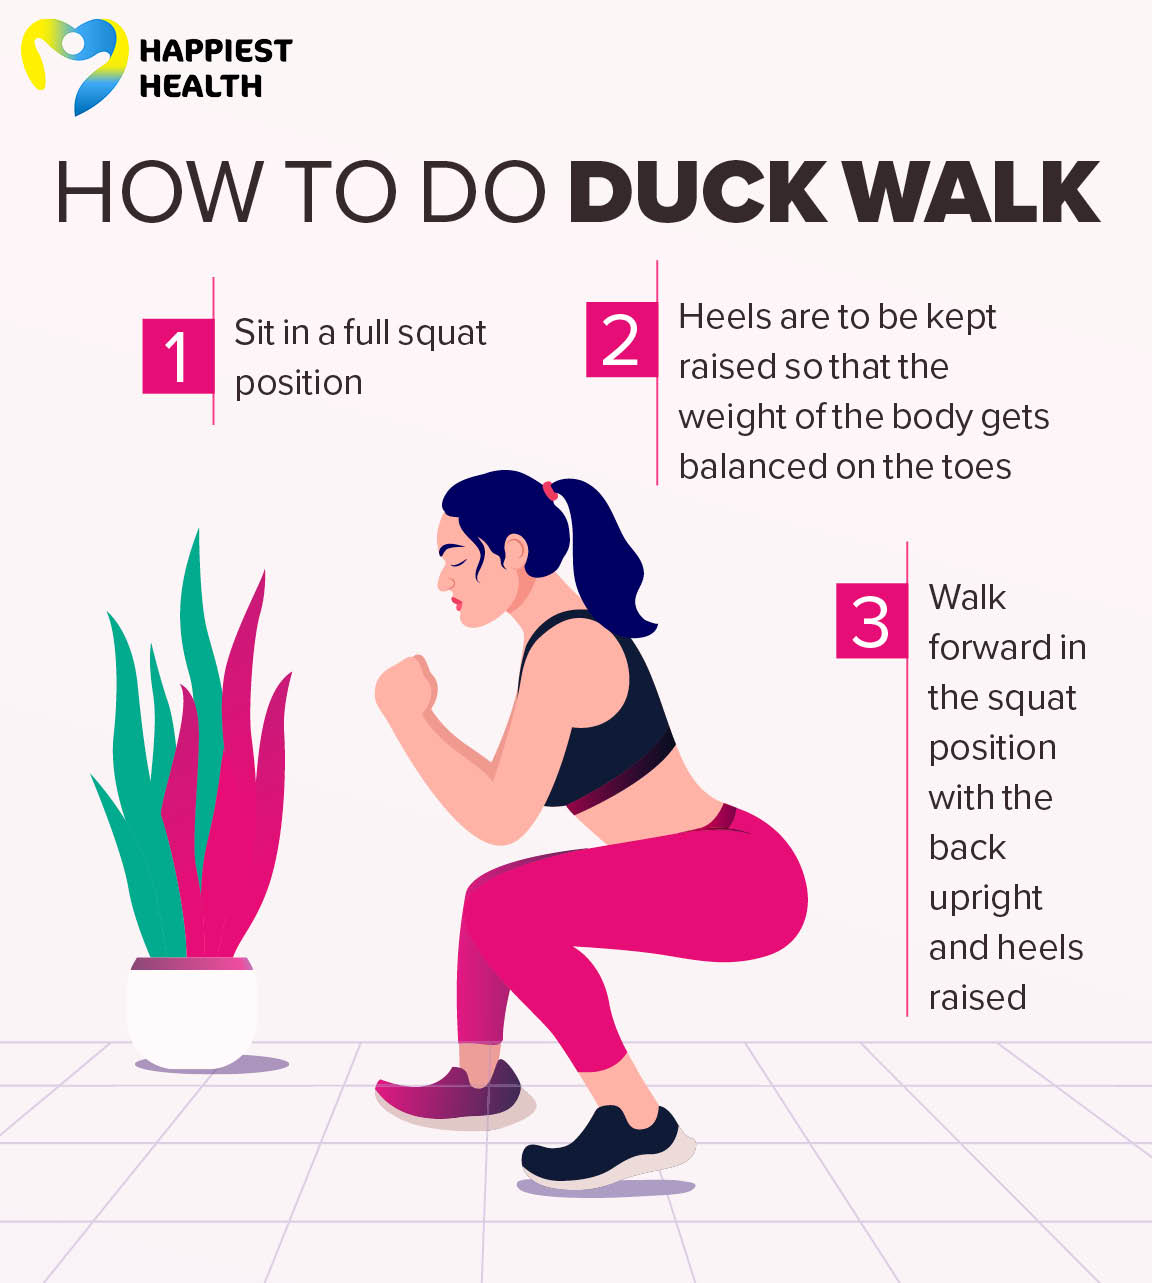 How to do the duck walk